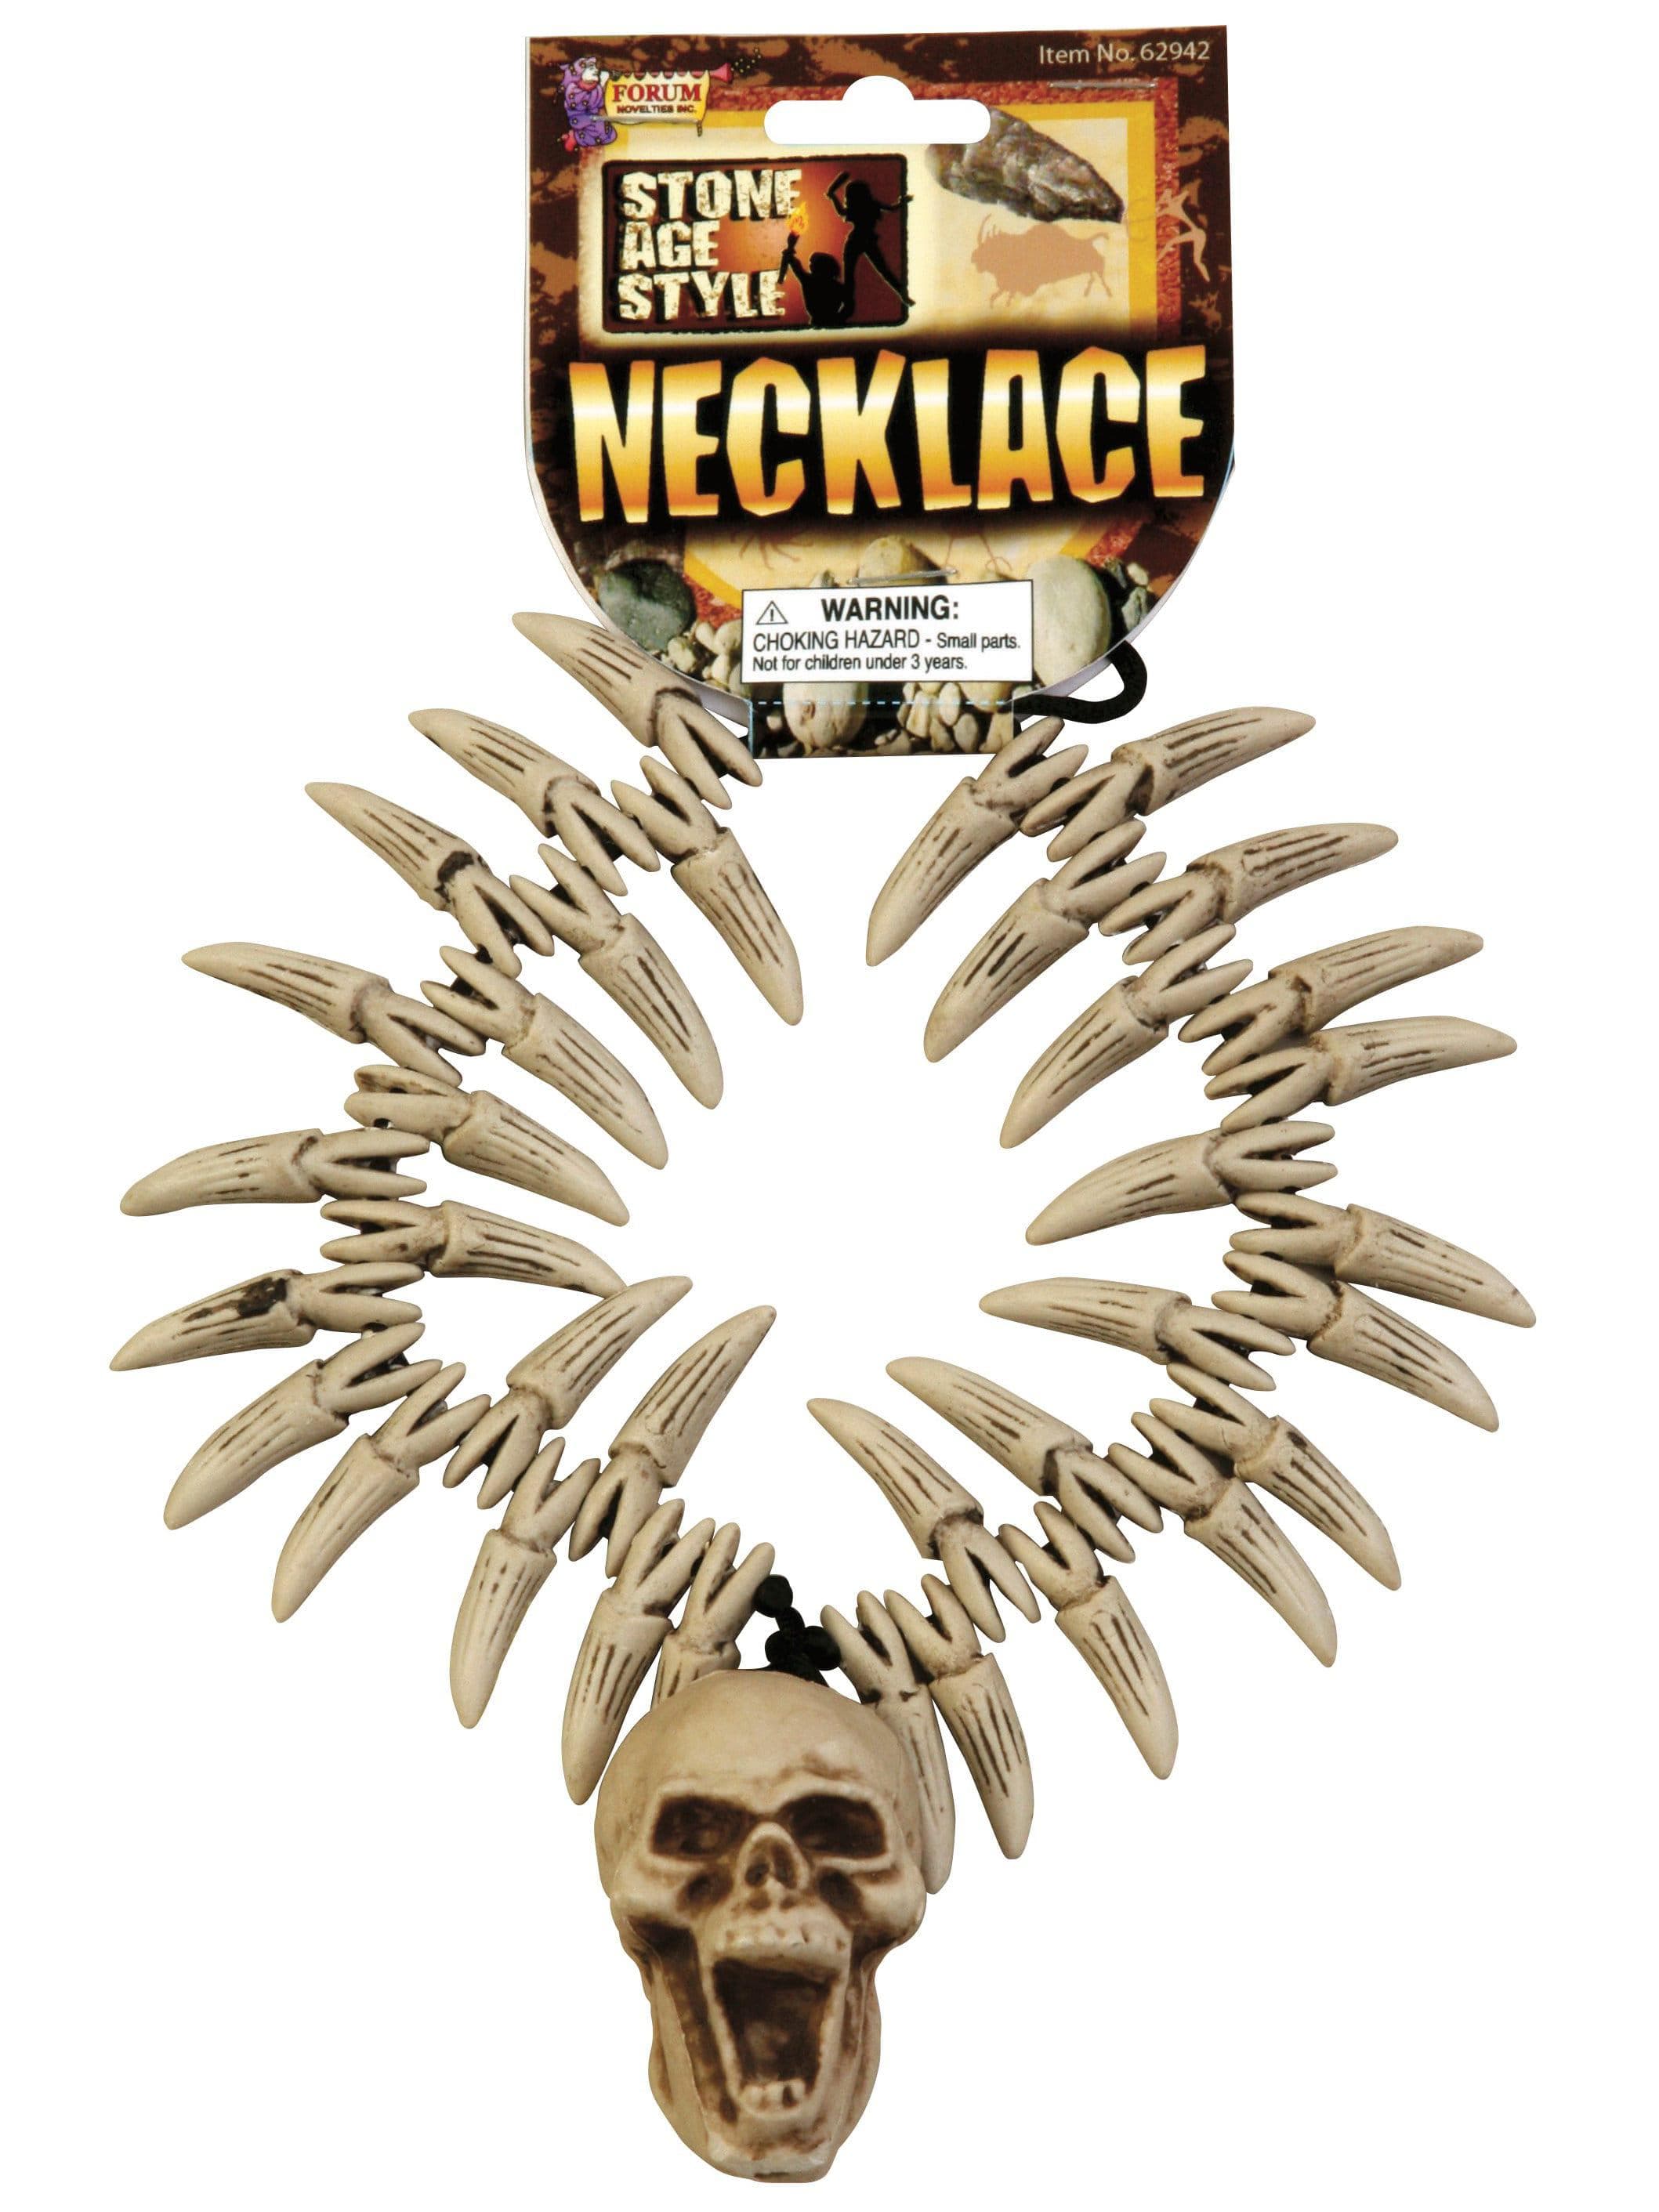 Adult Teeth and Skull Stone Age Necklace - costumes.com